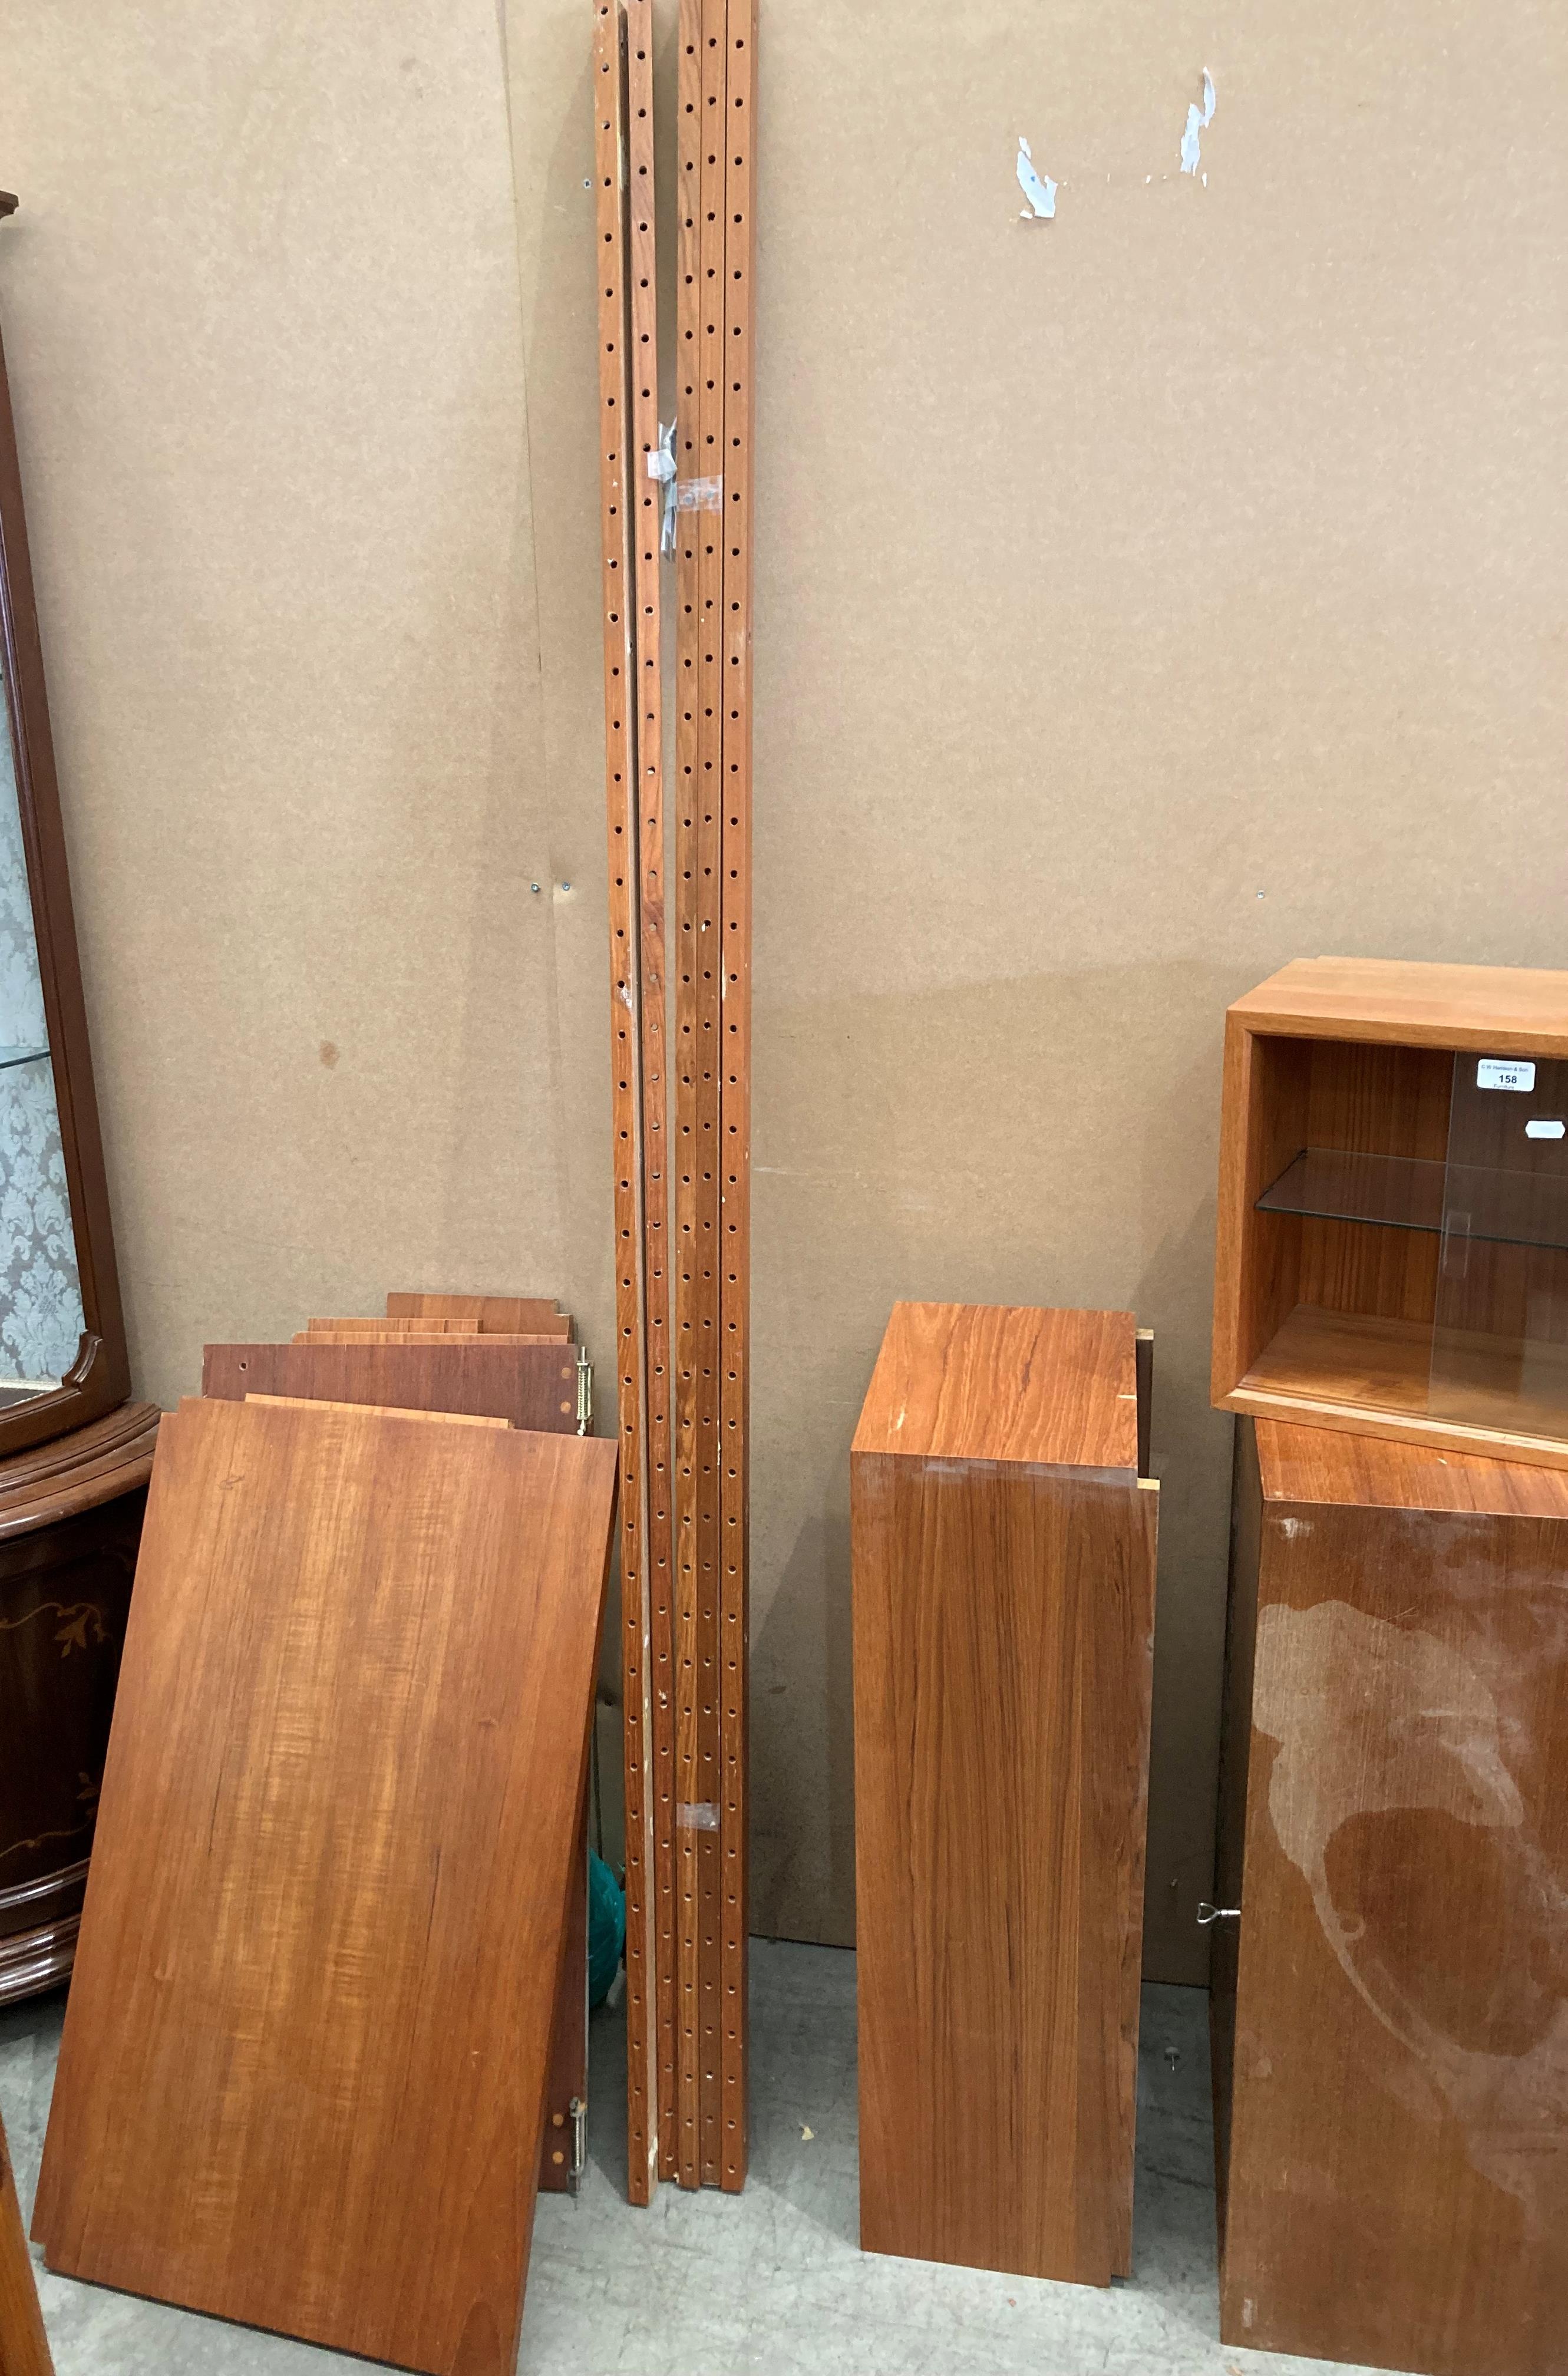 A mid Twentieth Century teak wall mounting unit - sold dismantled and as seen - no image showing it - Image 2 of 10